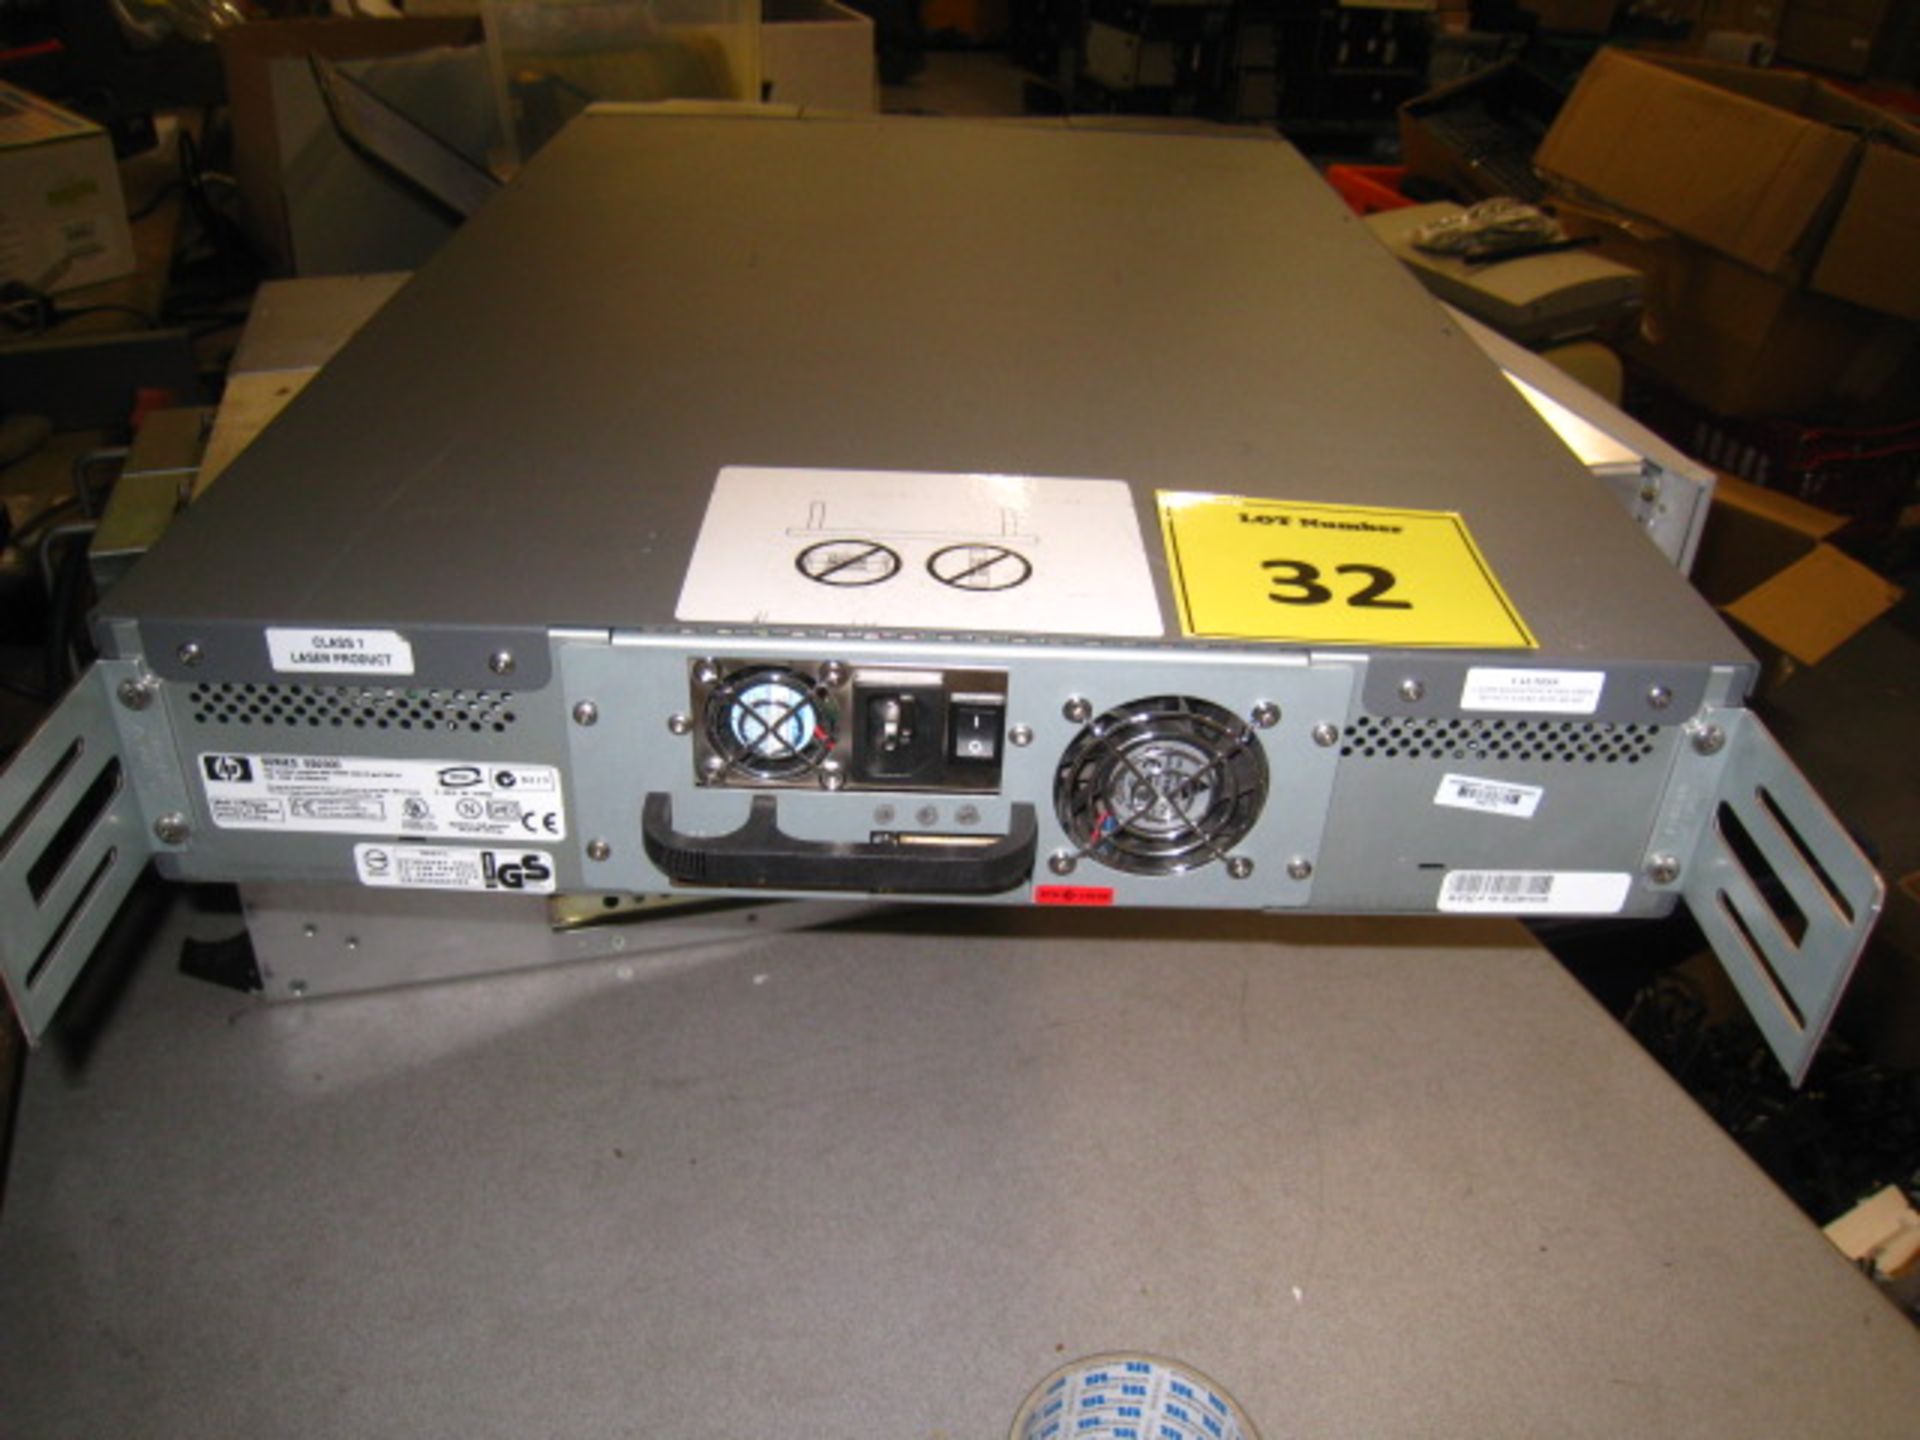 HP STORAGEWORKS SSL1016 TAPE LIBRARY. CONTAINS QUANTUM TR-S23XA-ZK TAPE DRIVE. - Image 2 of 2